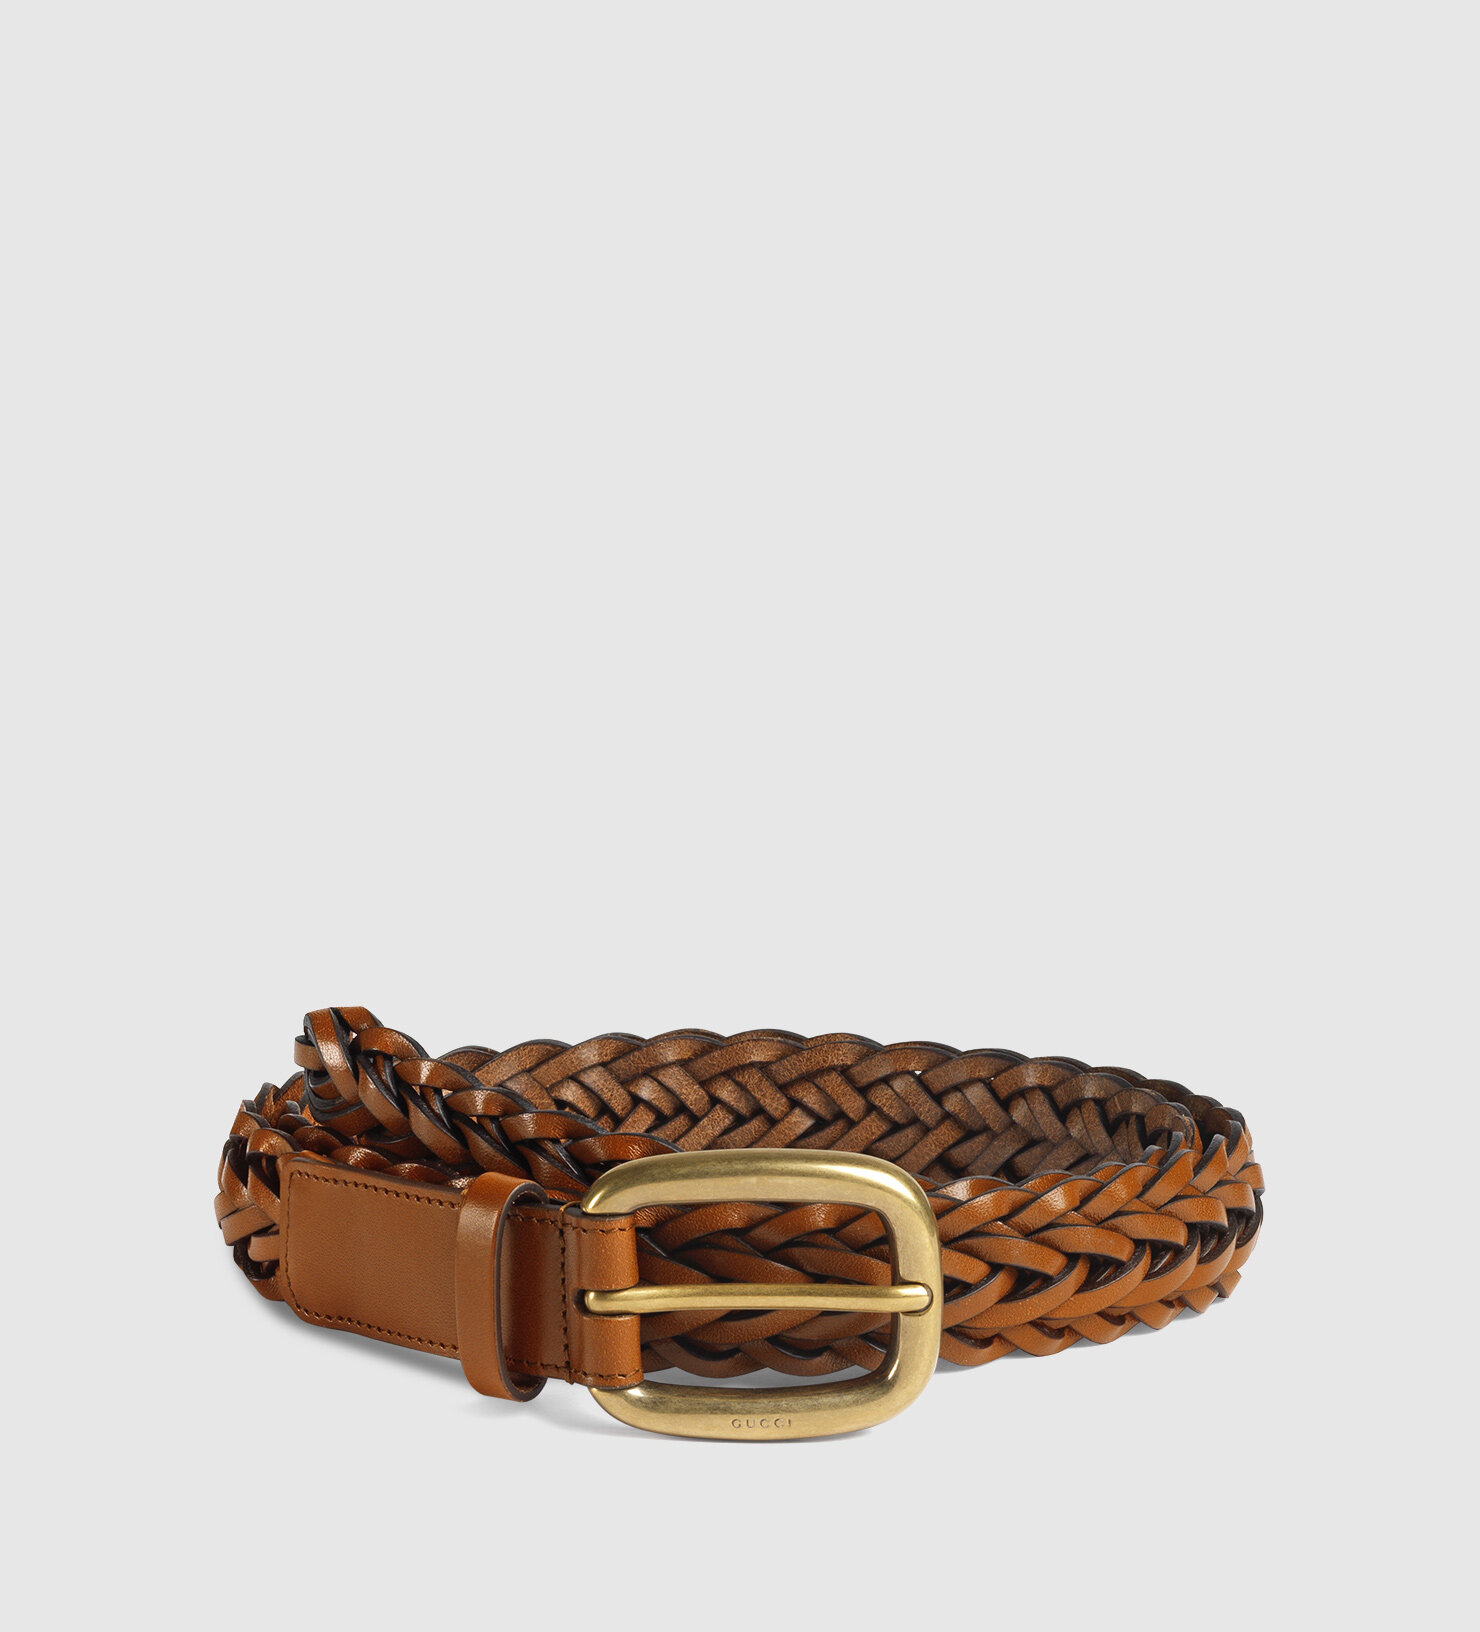 Gucci Hand-Braided Leather Belt in Brown.jpg